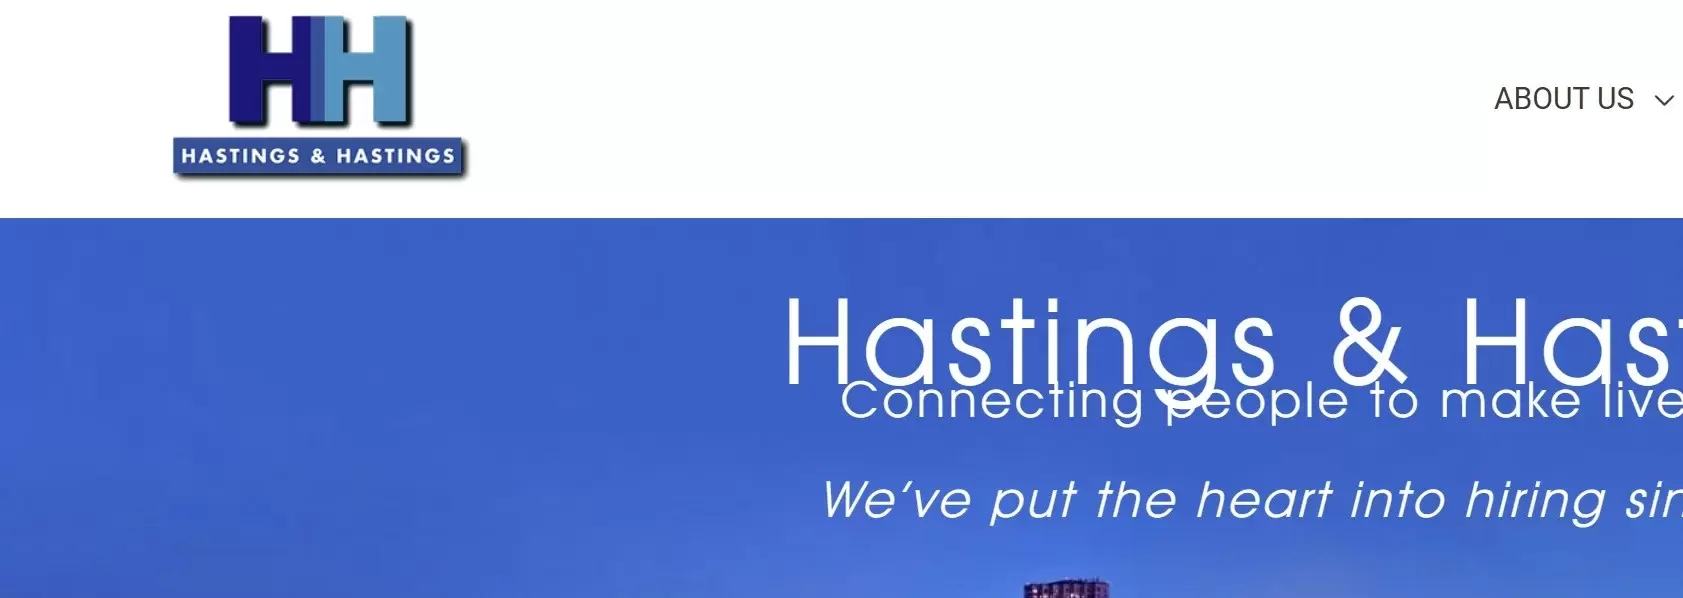 Hastings & Hastings staffing company profile and reviews